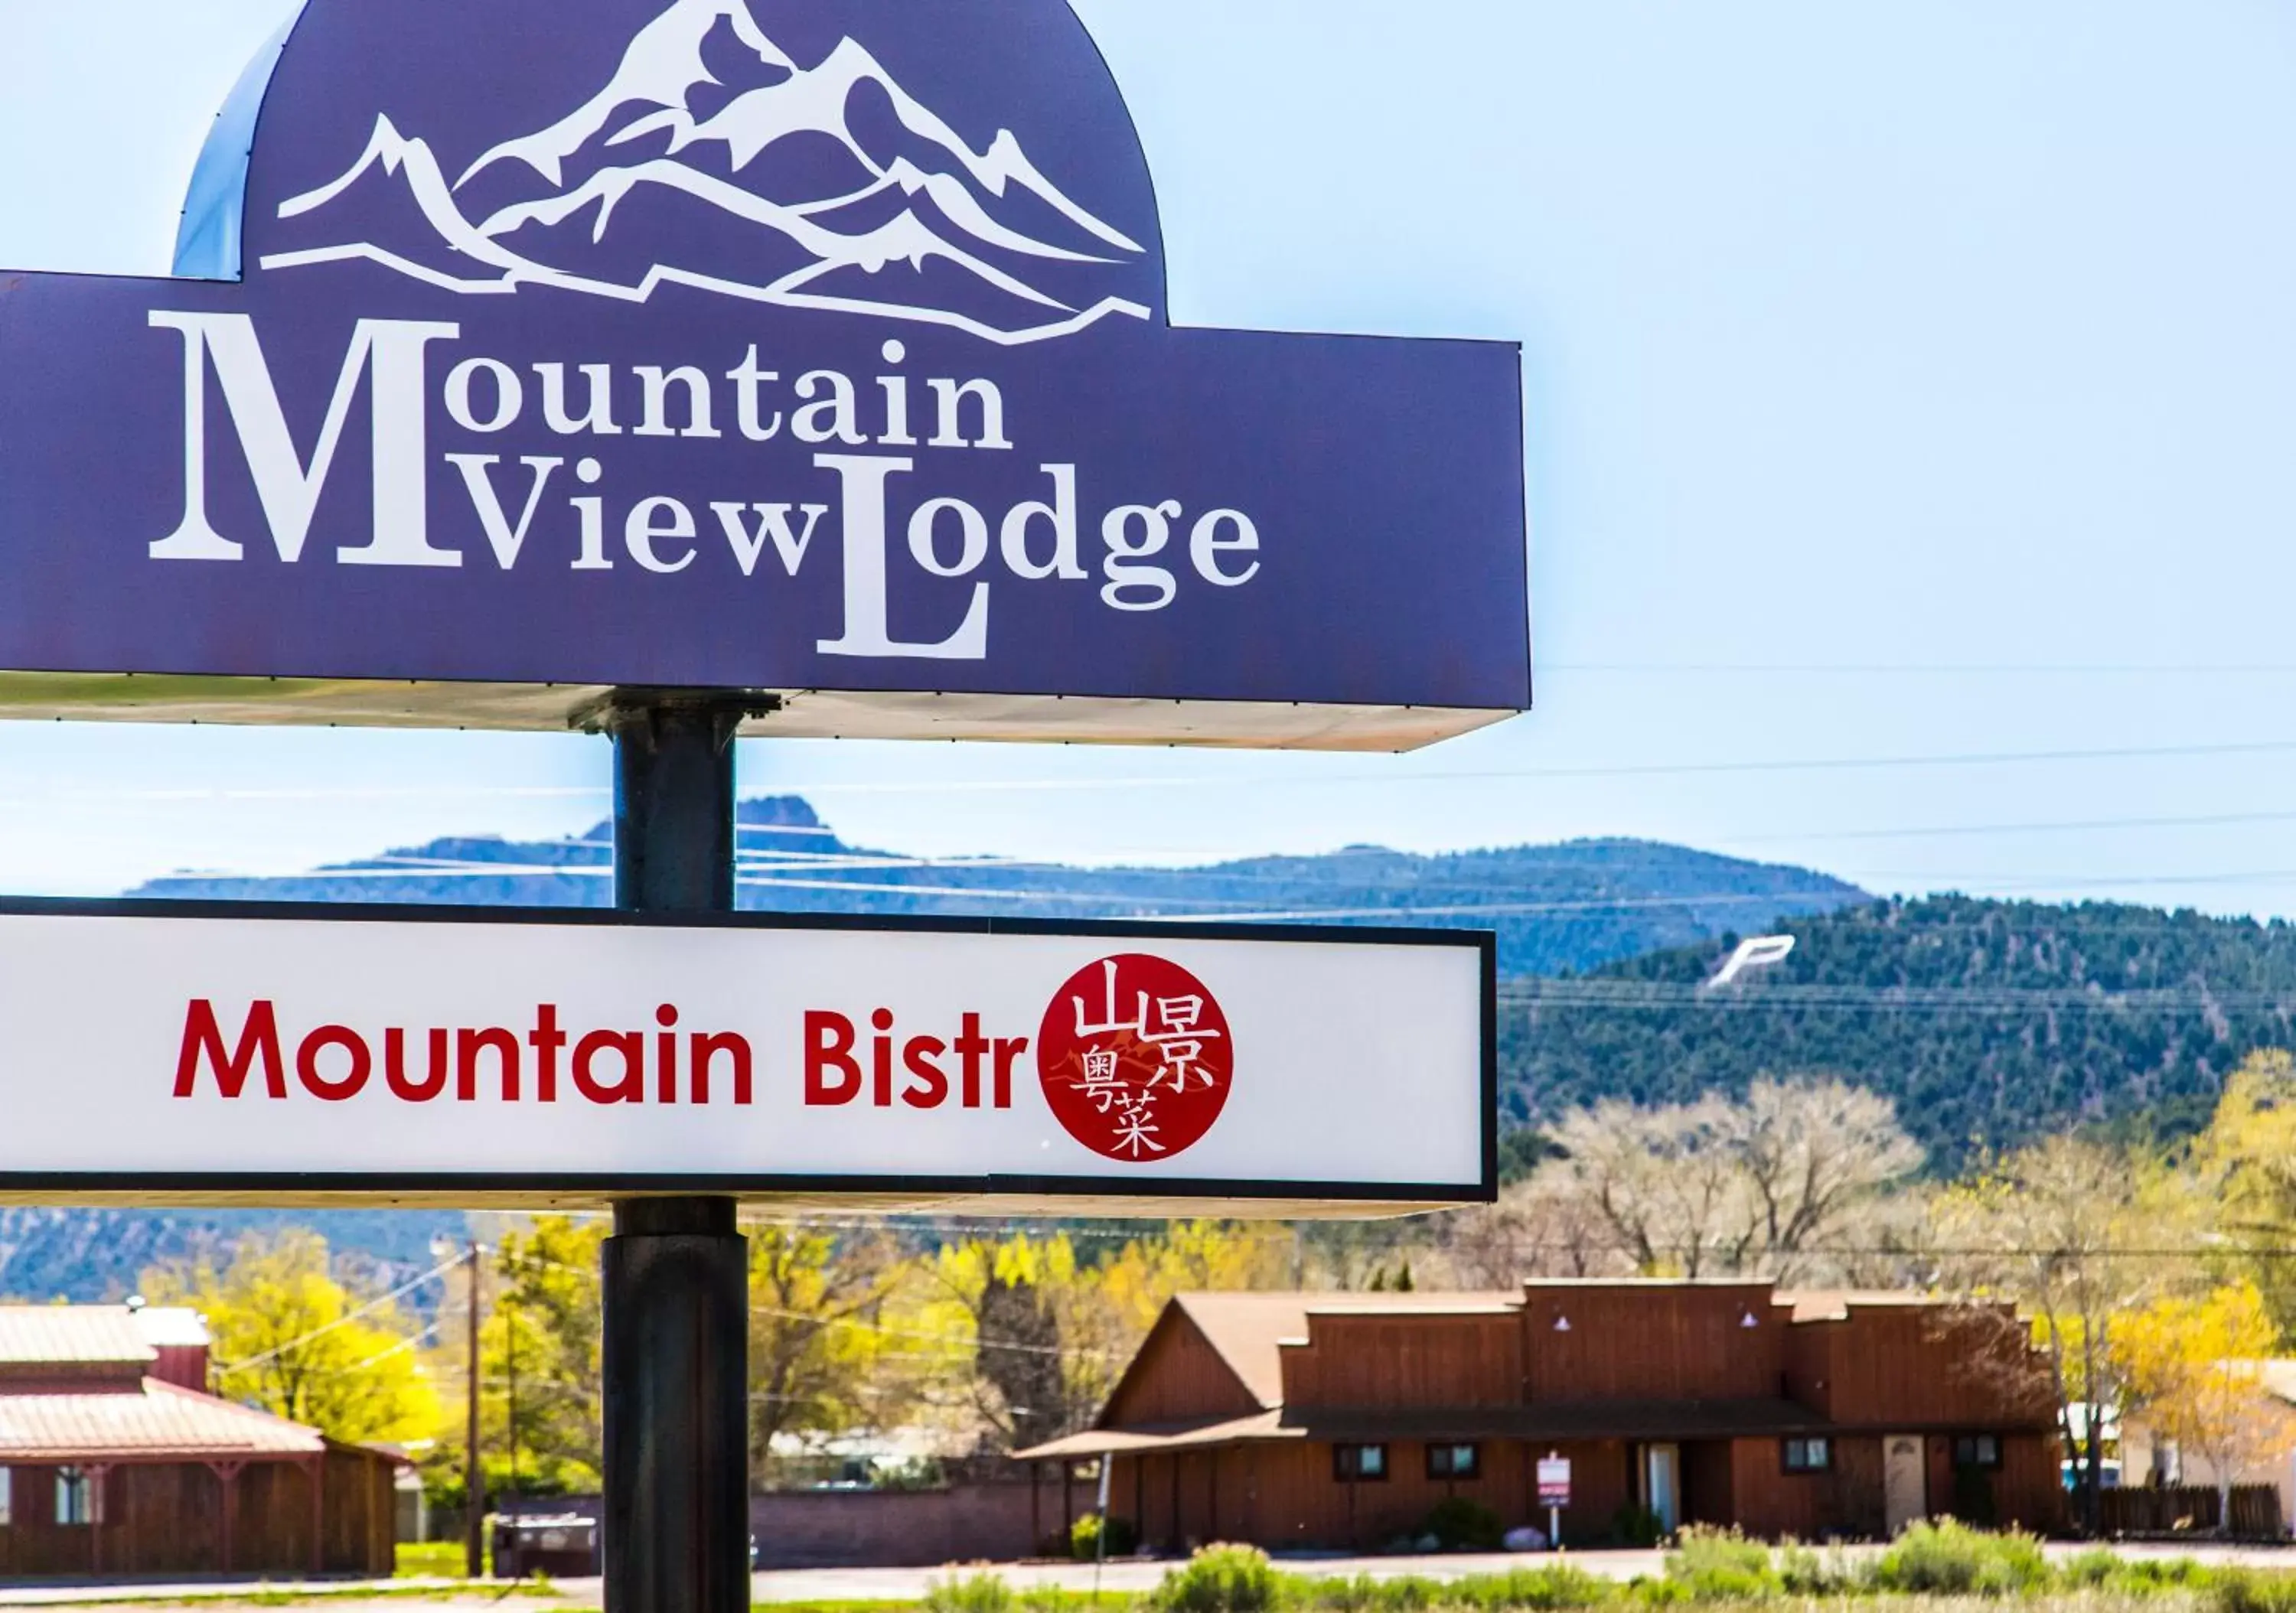 Property logo or sign in Mountain View Lodge